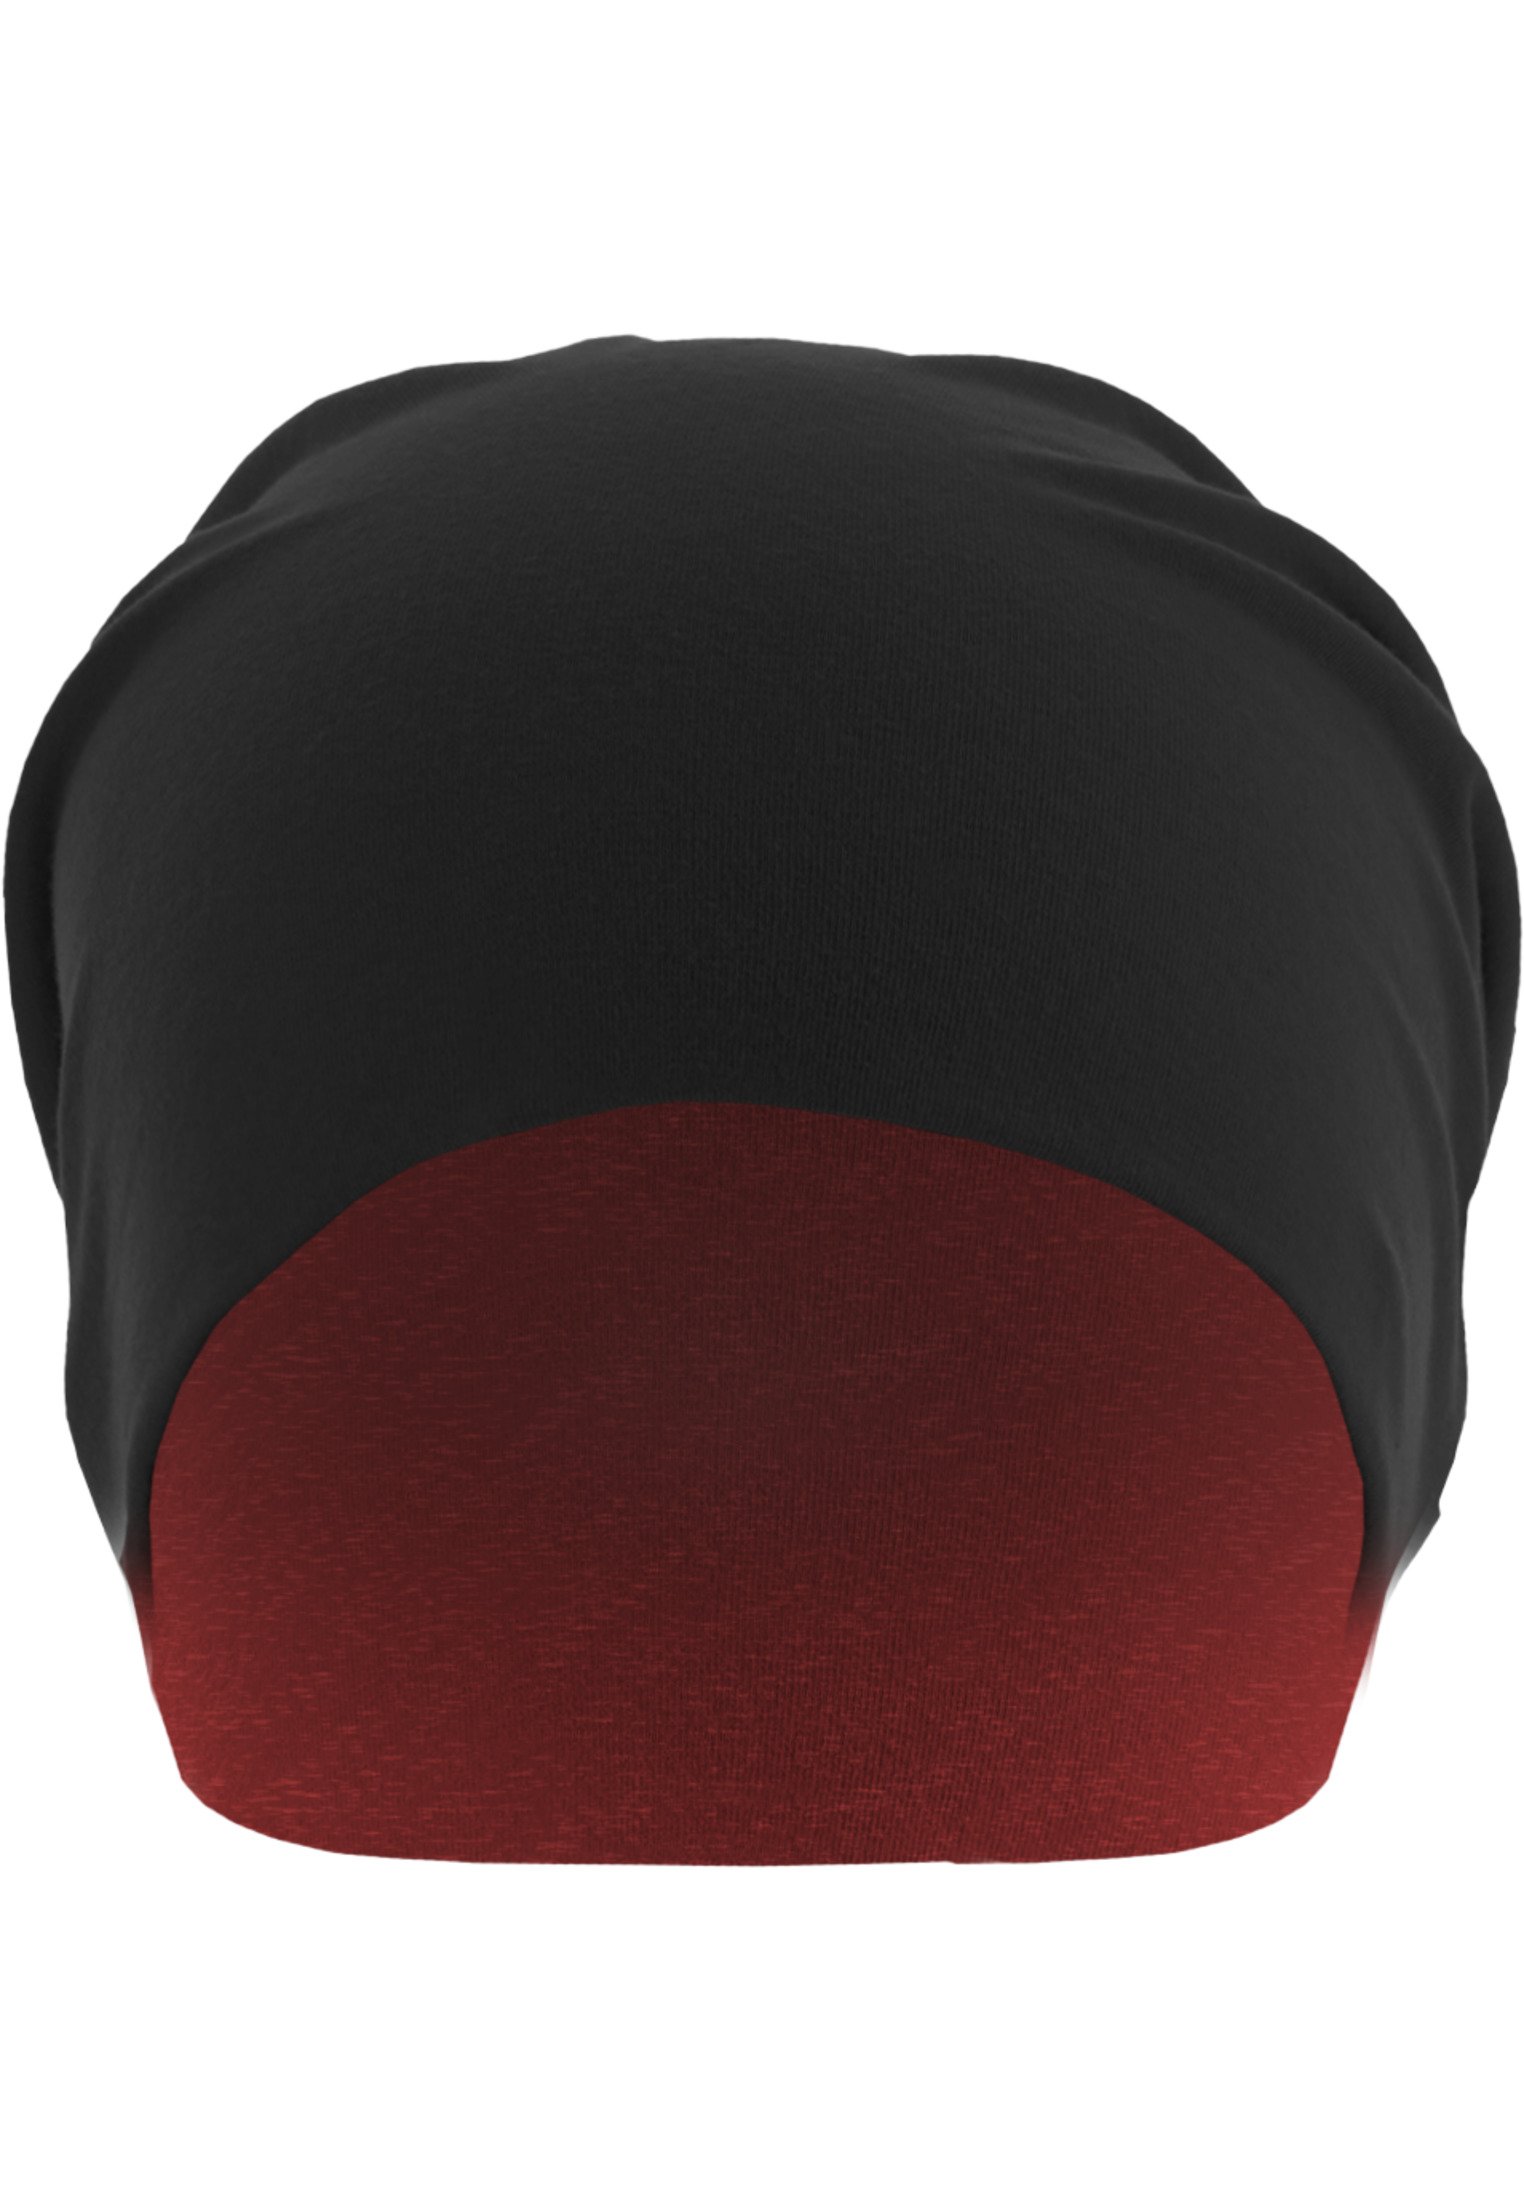 Jersey Beanie reversible blk/red one size